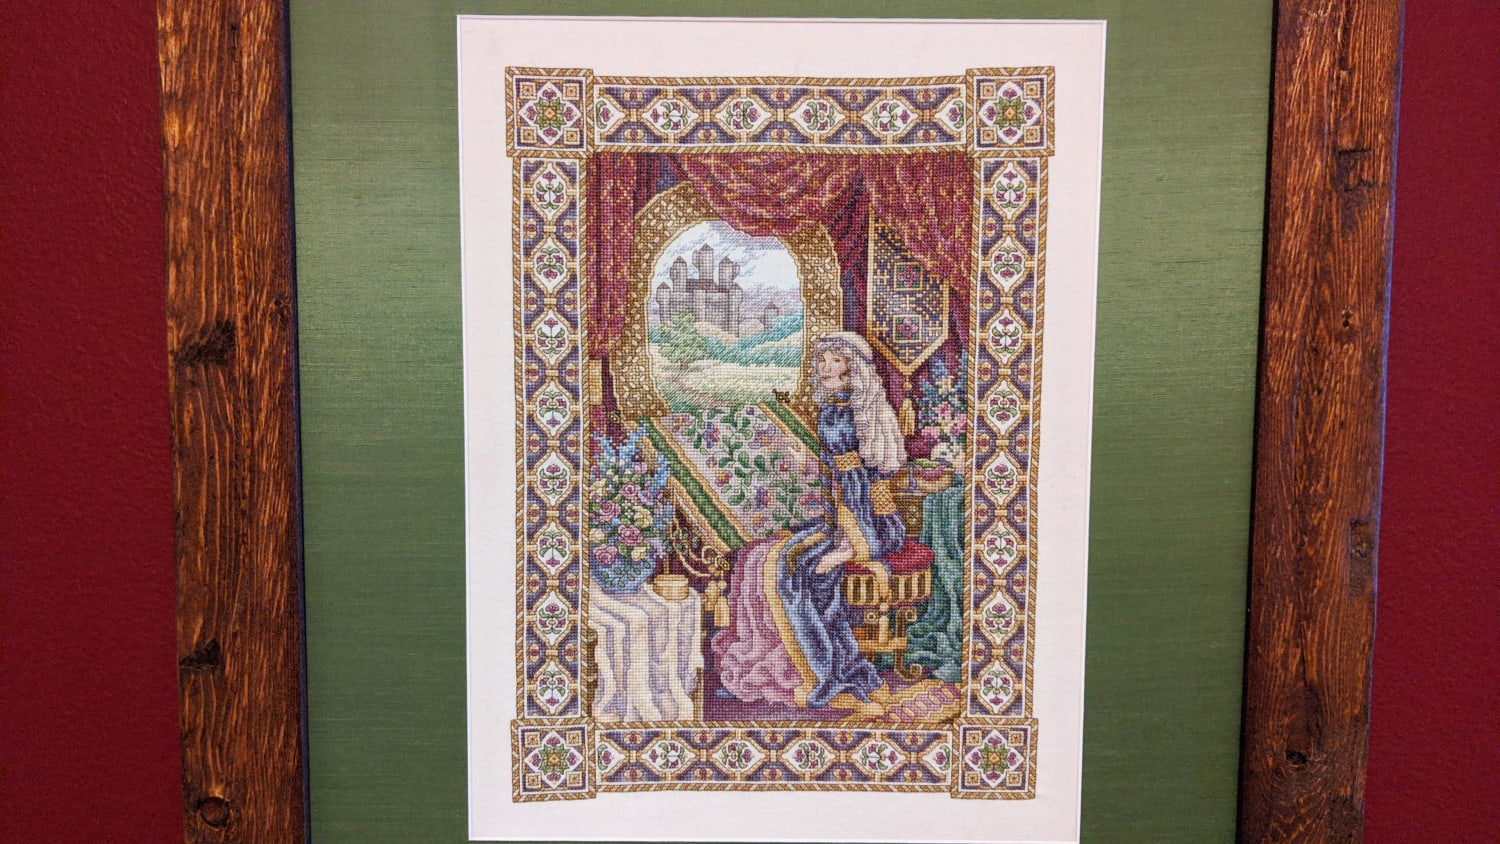 I cross stitched the Lady of Shalott over 22 years. She's embroidering a floral tapestry, trapped in her castle. This is my biggest quarantine finish. Blog post with high res images in comments.